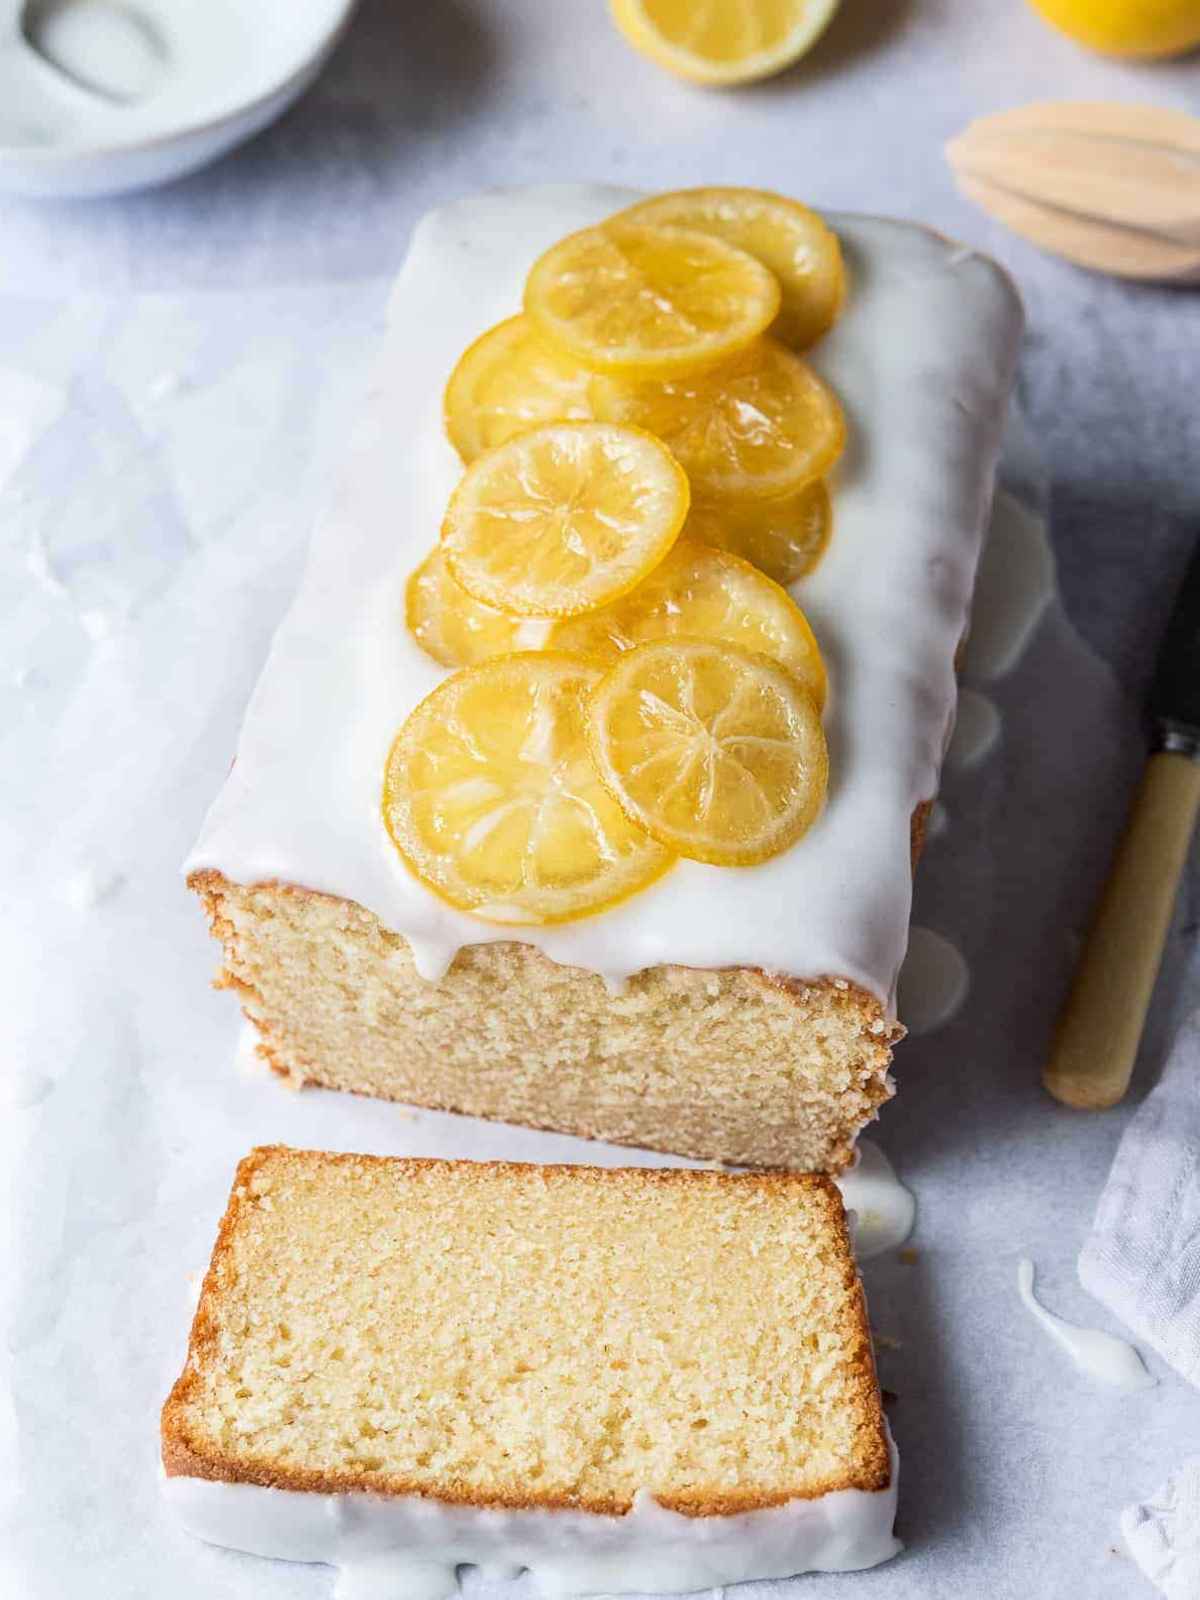 Pound cake garnished with white icing and candied lemon slices.